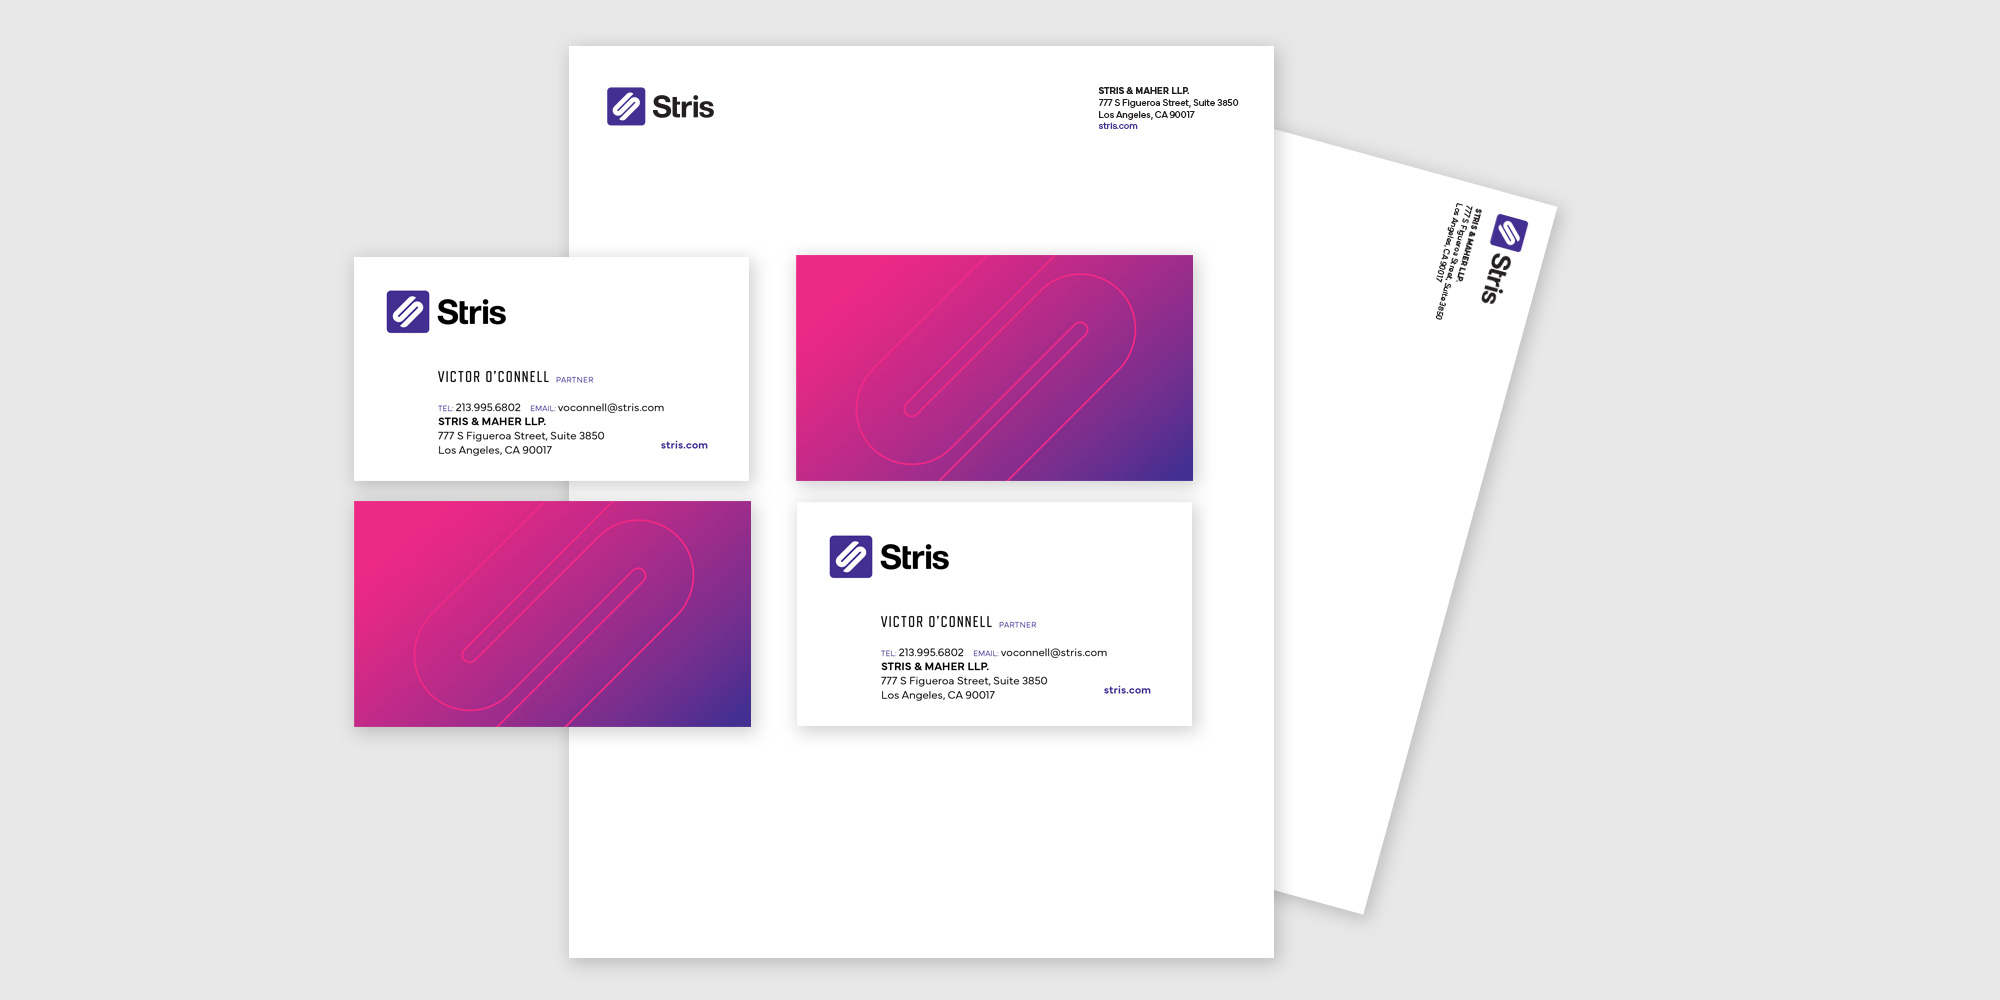 New stationery with the Stris law firm brand, logo and logomark, including letterhead, envelopes, and business cards